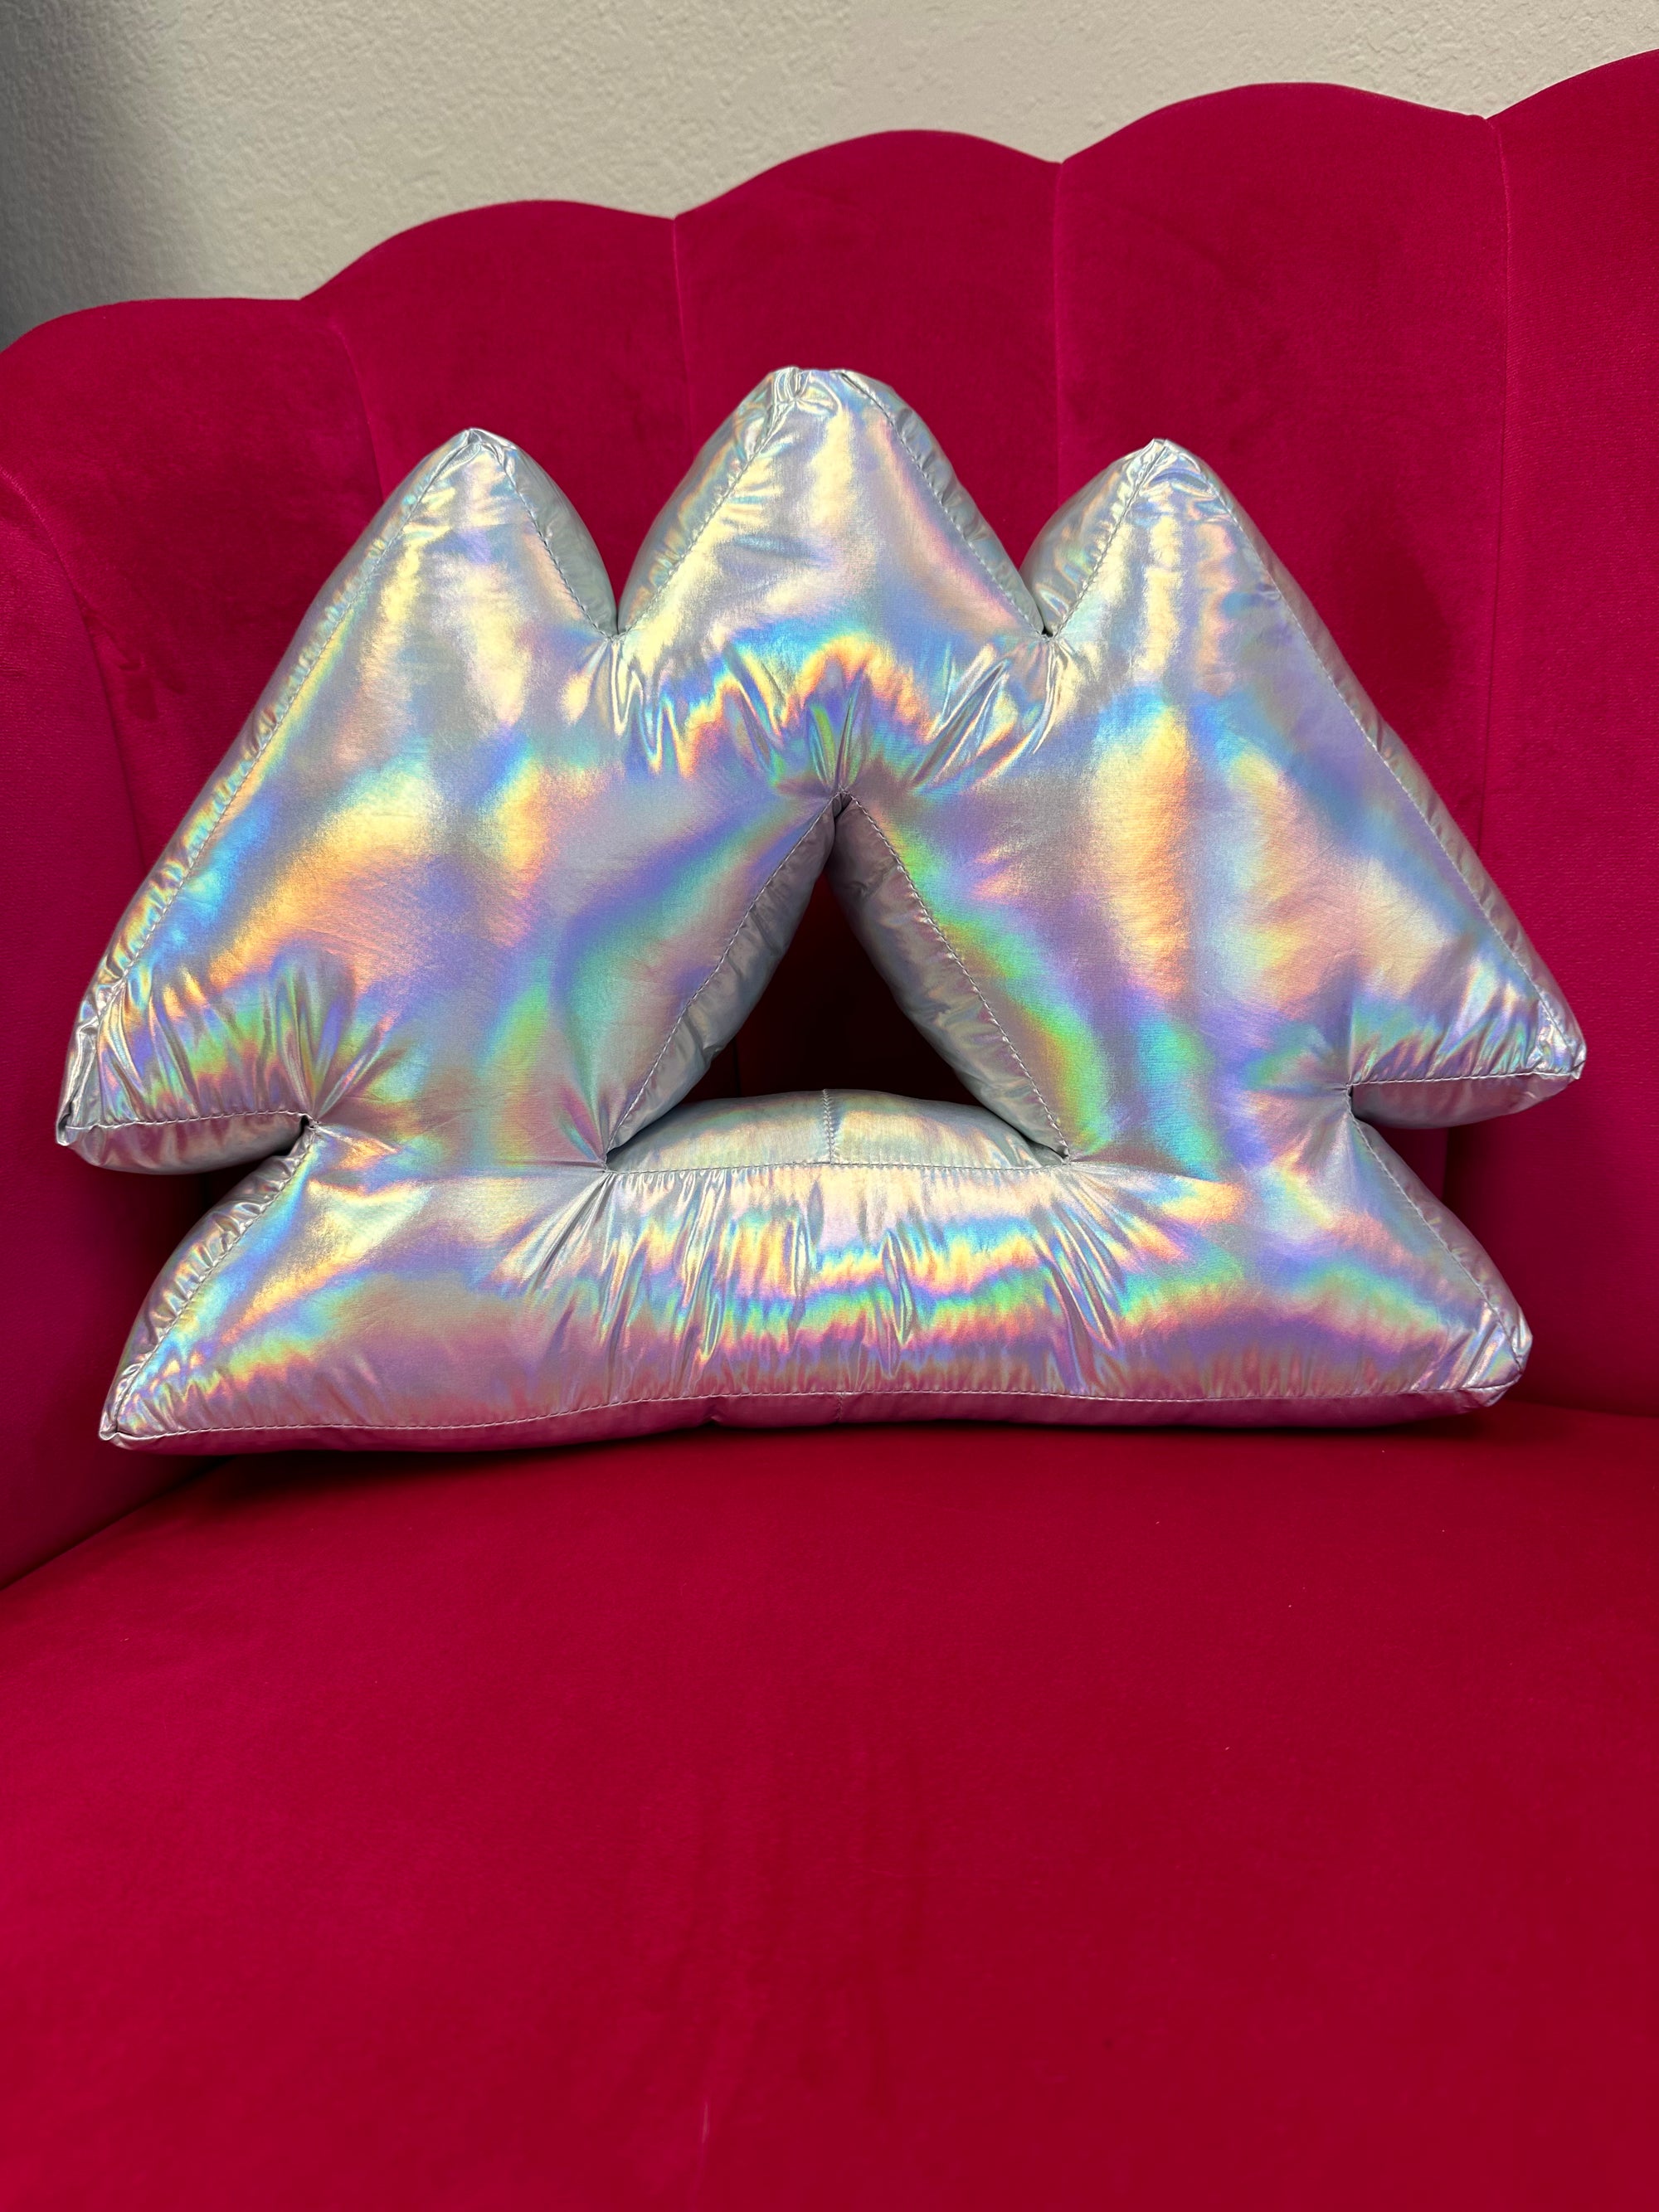 WAKAAN LE Iridescent Plush Pillow V2 [NEW]